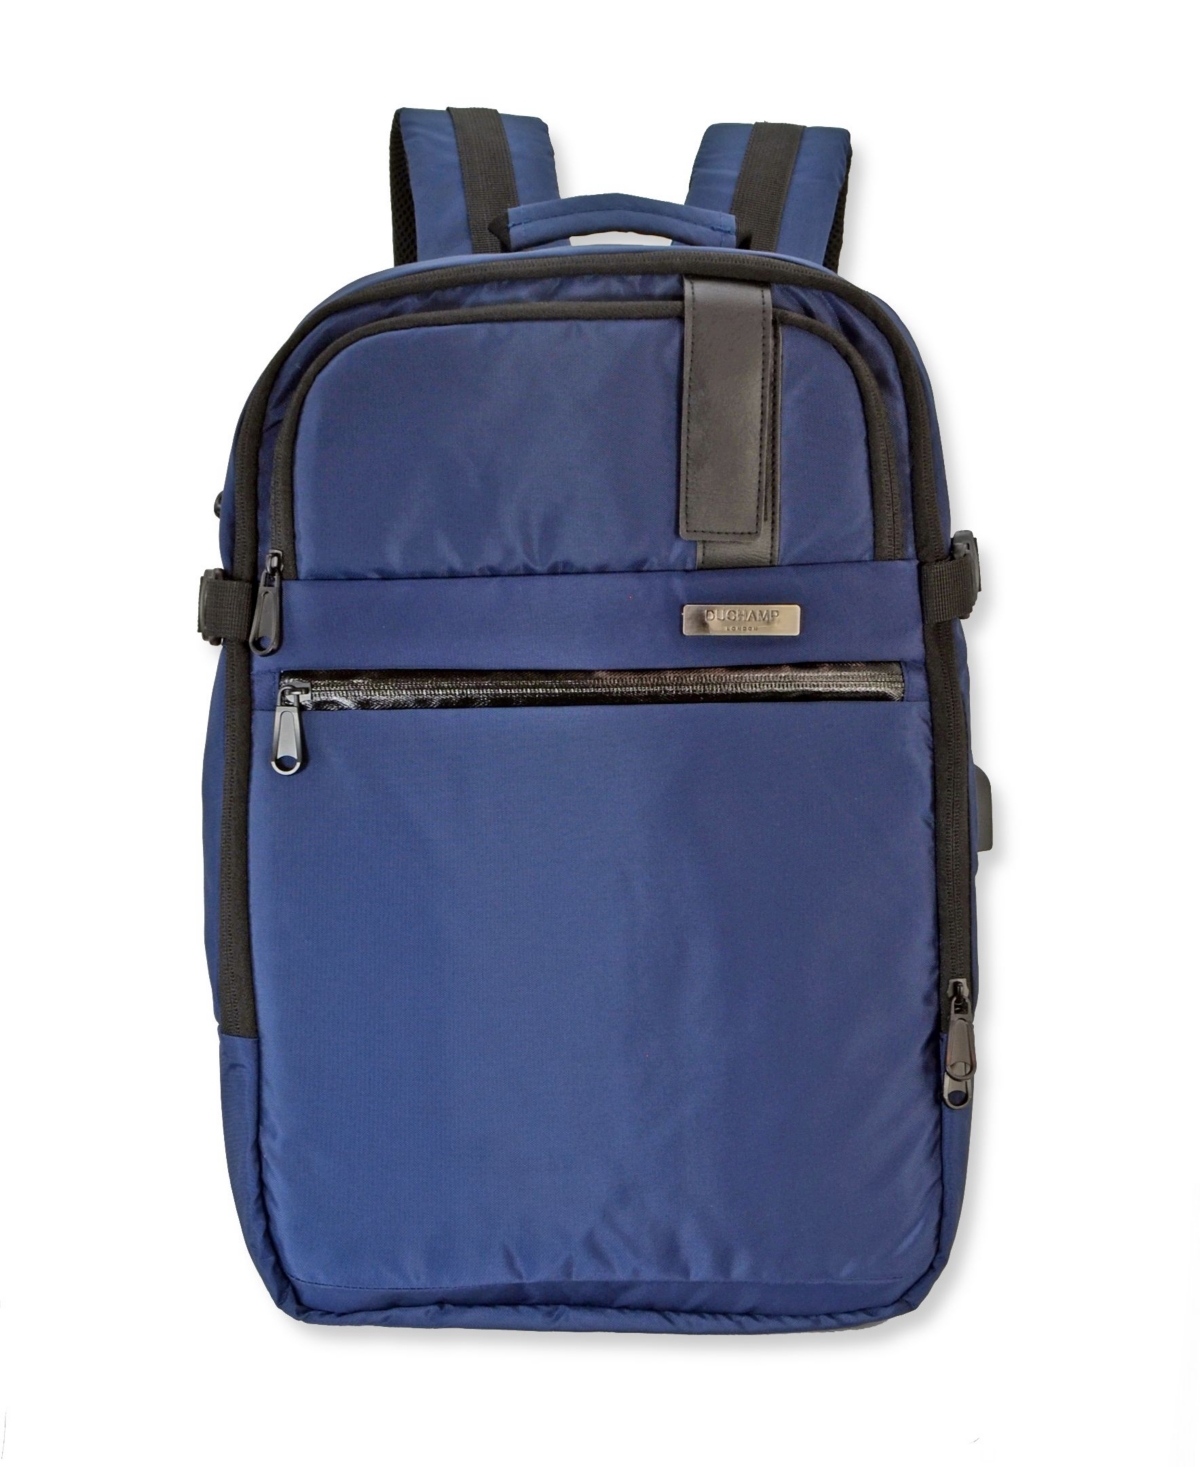 Backpack Suitcase - Navy